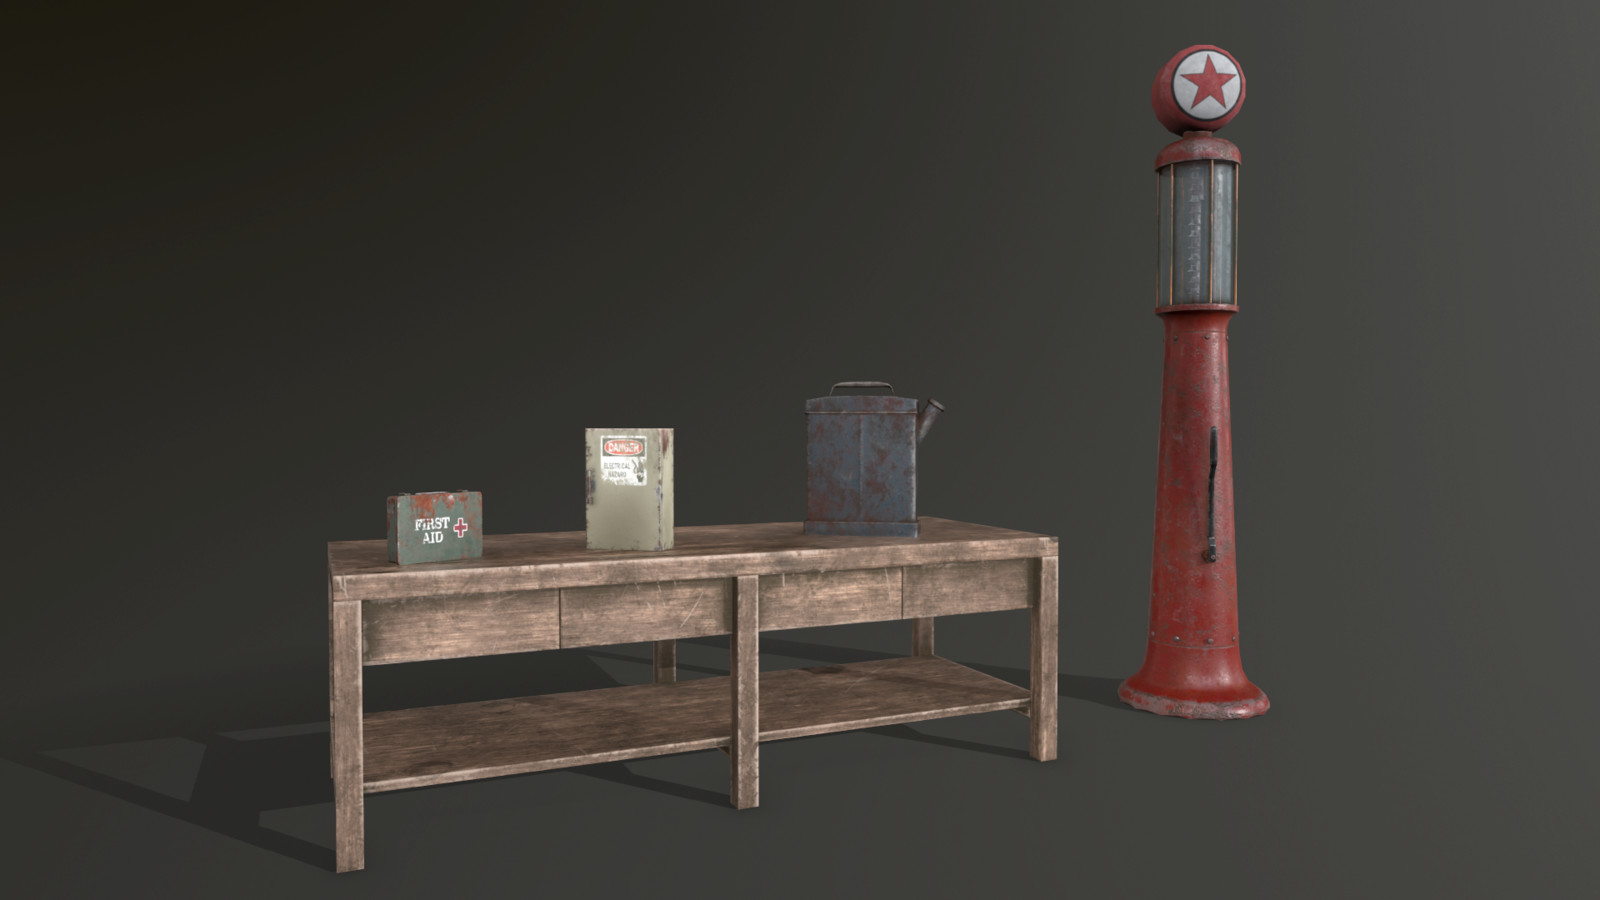 Workbench and gas pump in Marmoset